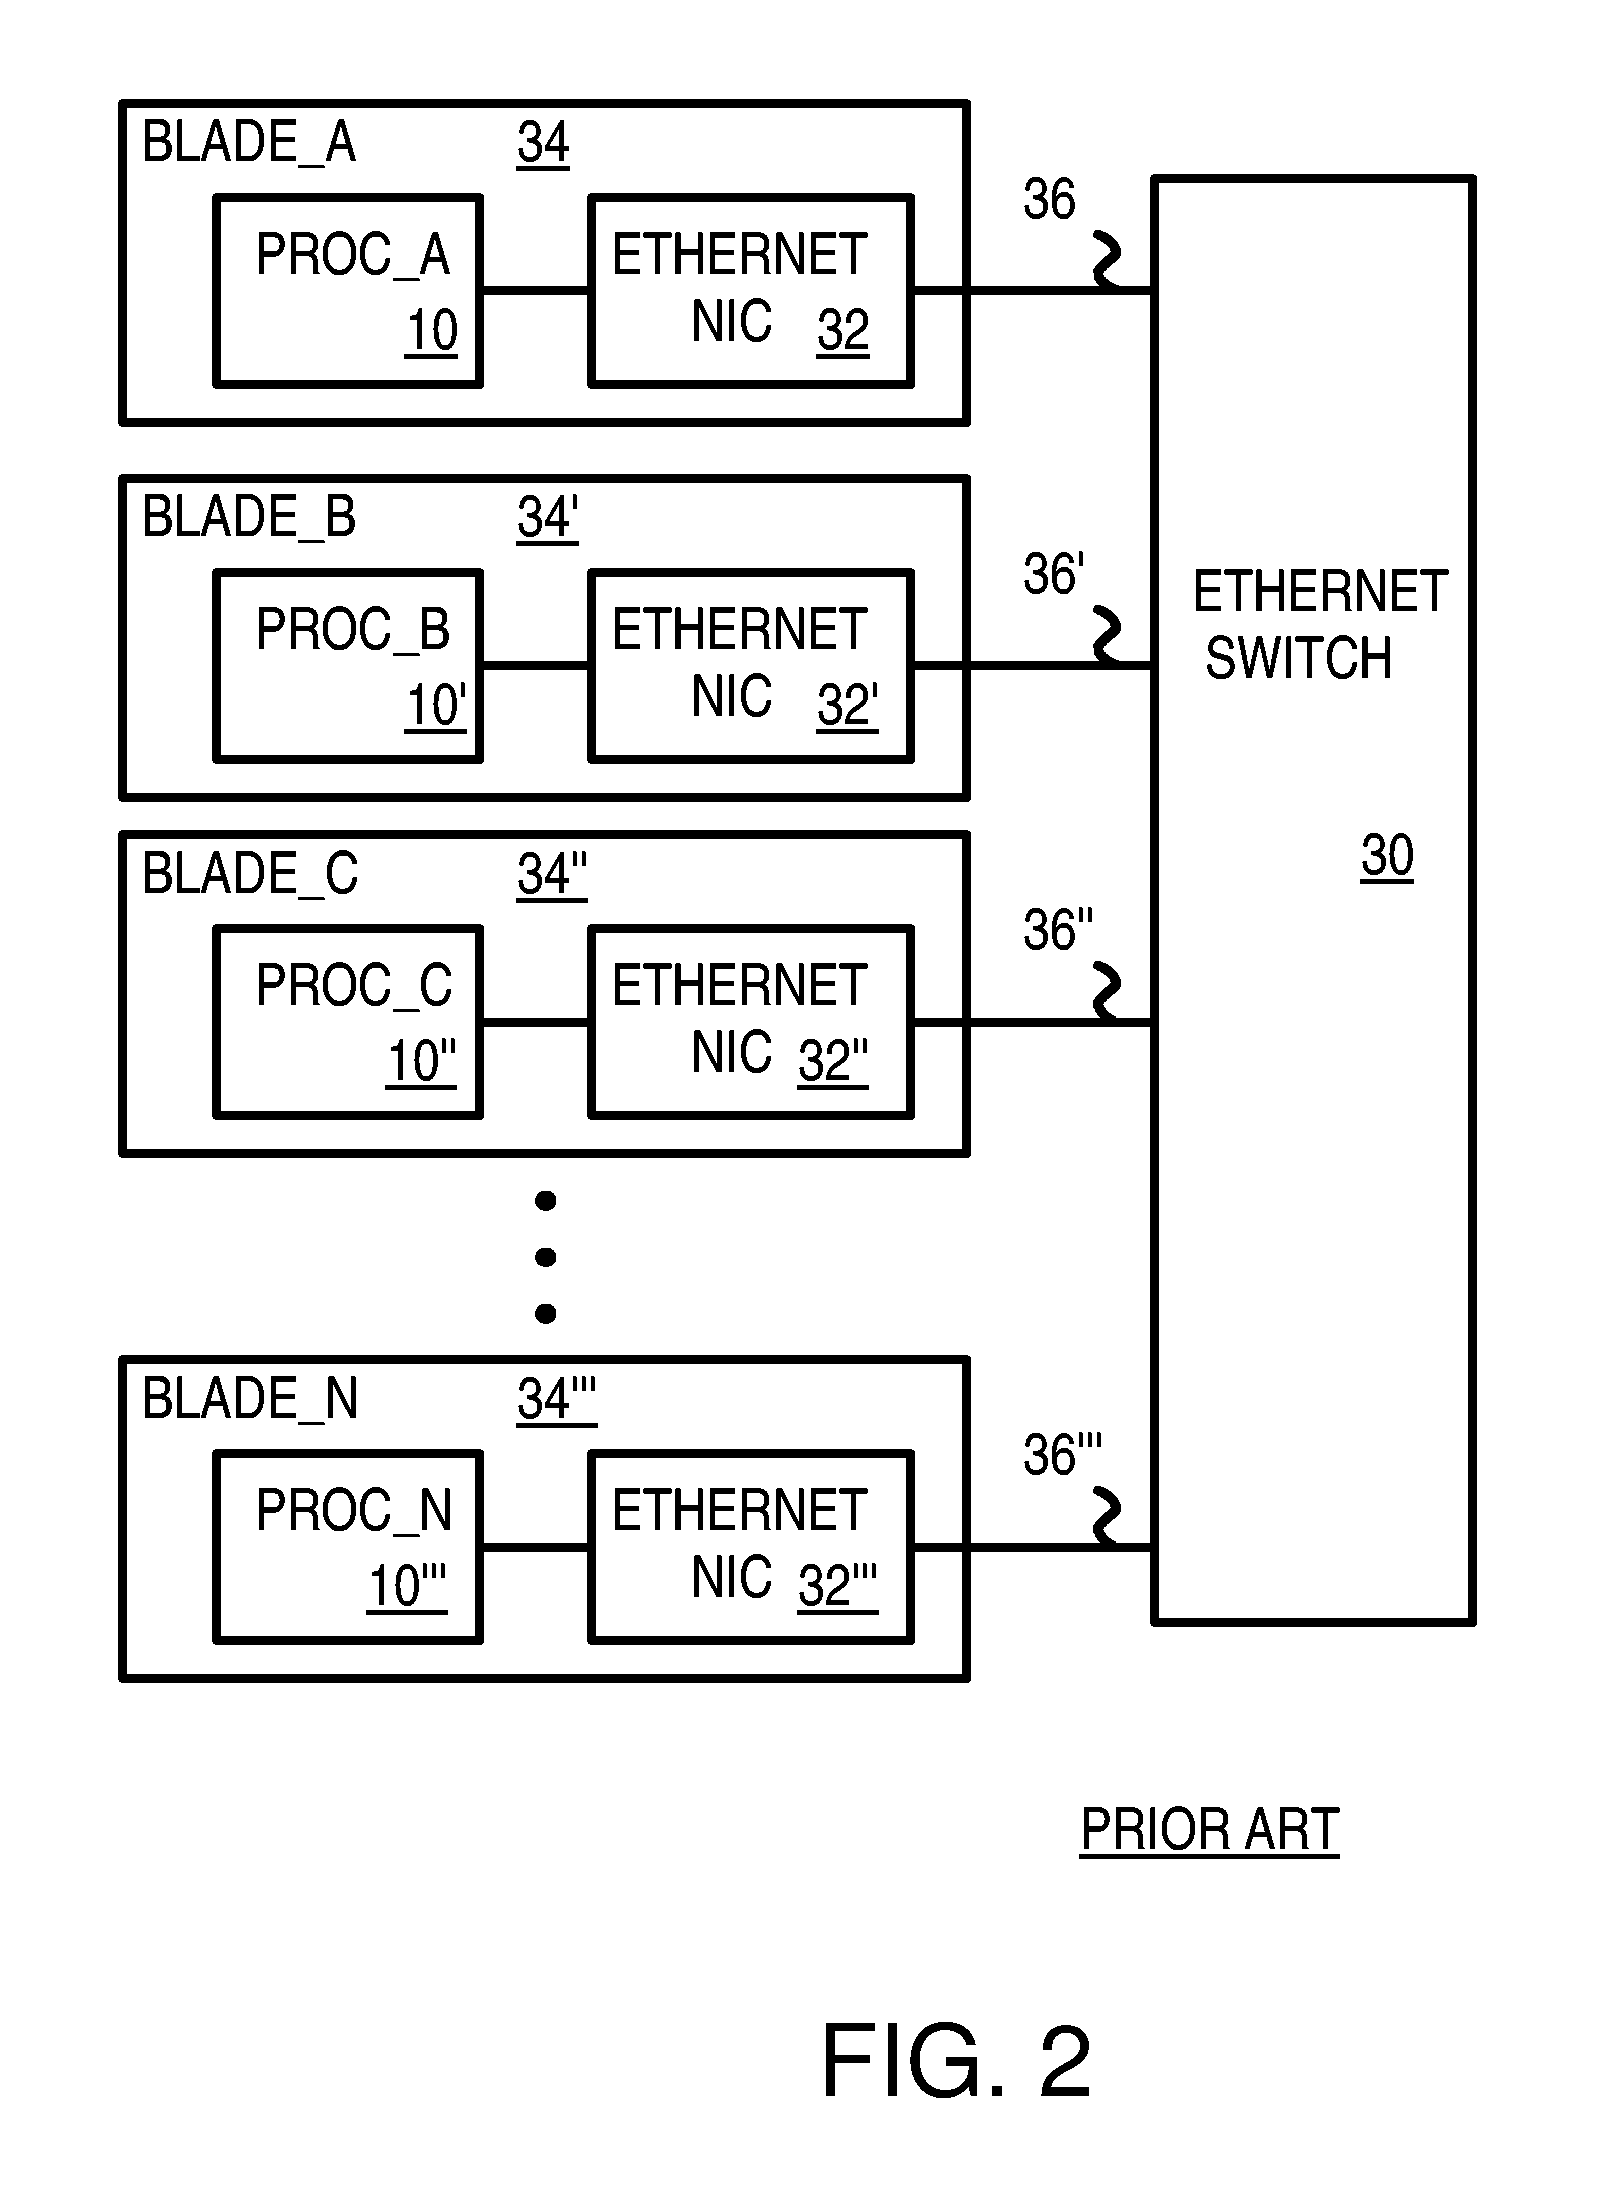 Pseudo-ethernet switch without ethernet media-access-controllers (MAC's) that copies ethernet context registers between PCI-express ports